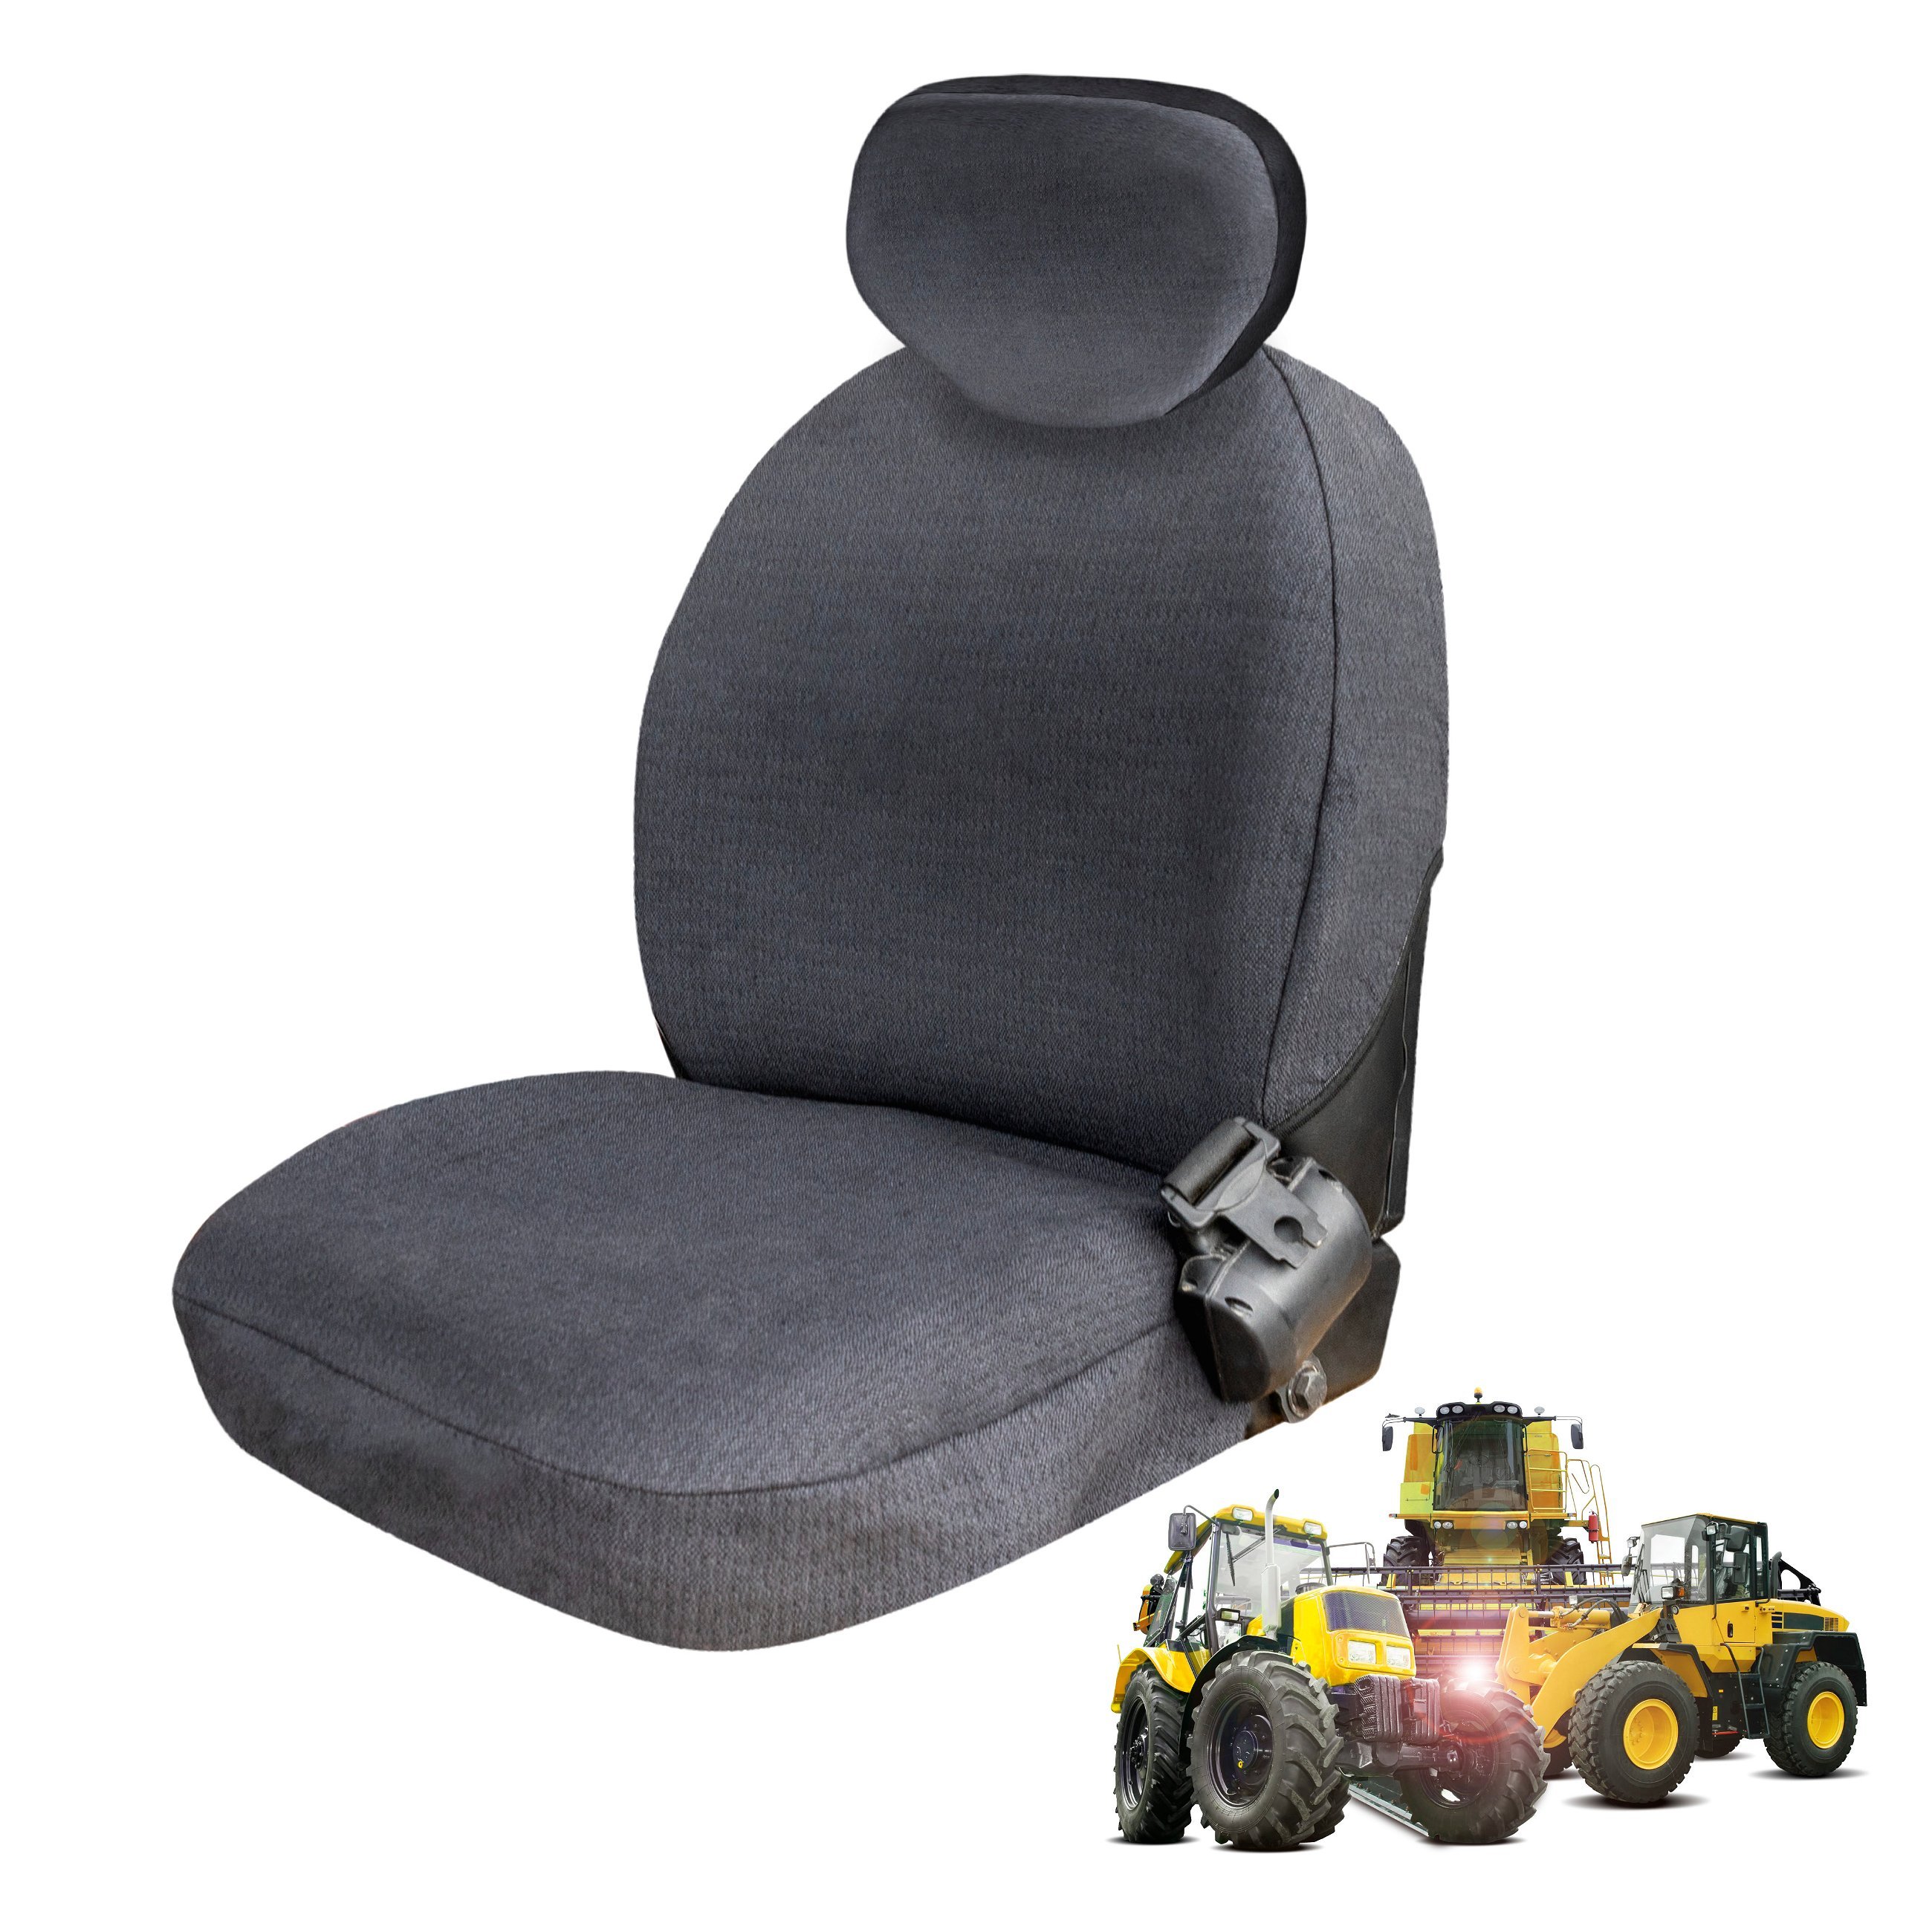 Seat cover small excavator, forklift, size 5